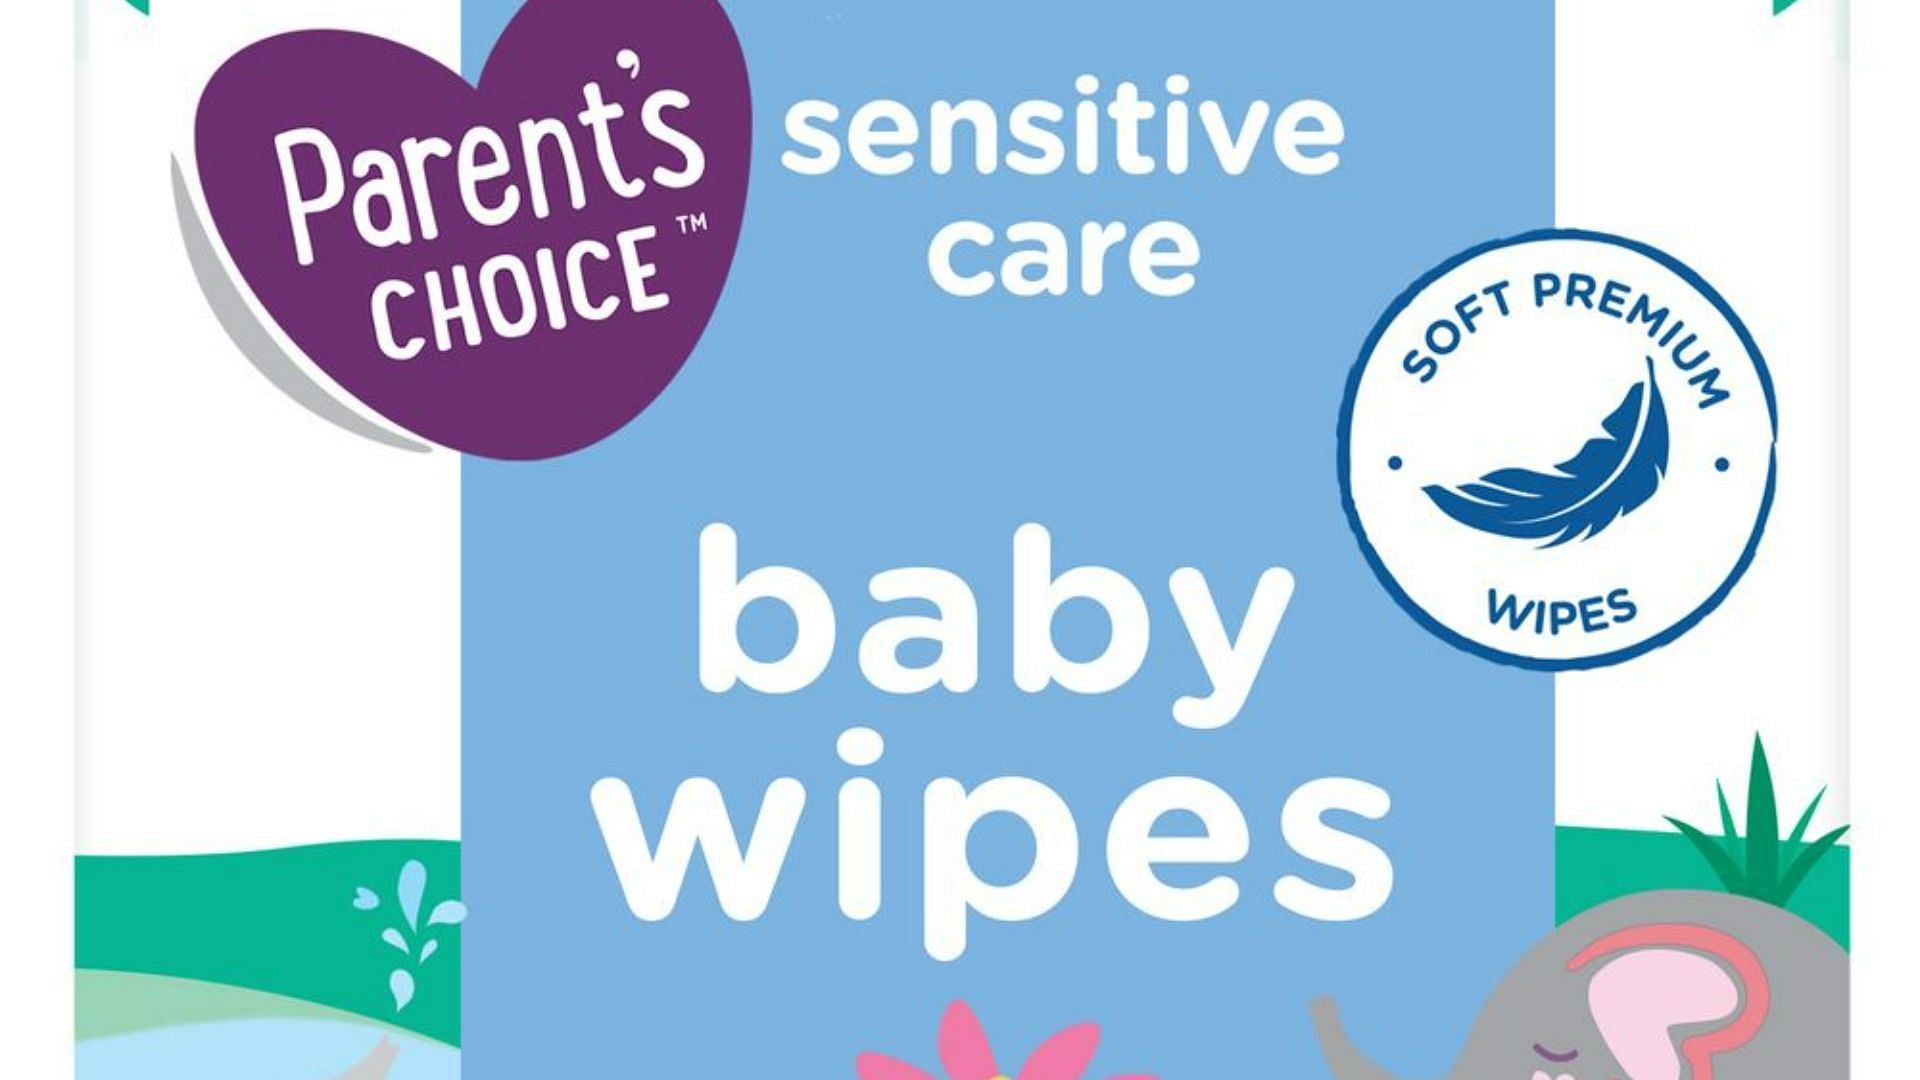 Specific Parent&#039;s Choice Baby Wipes recalled amid mercury and arsenic presence (Image via Shutterstock)